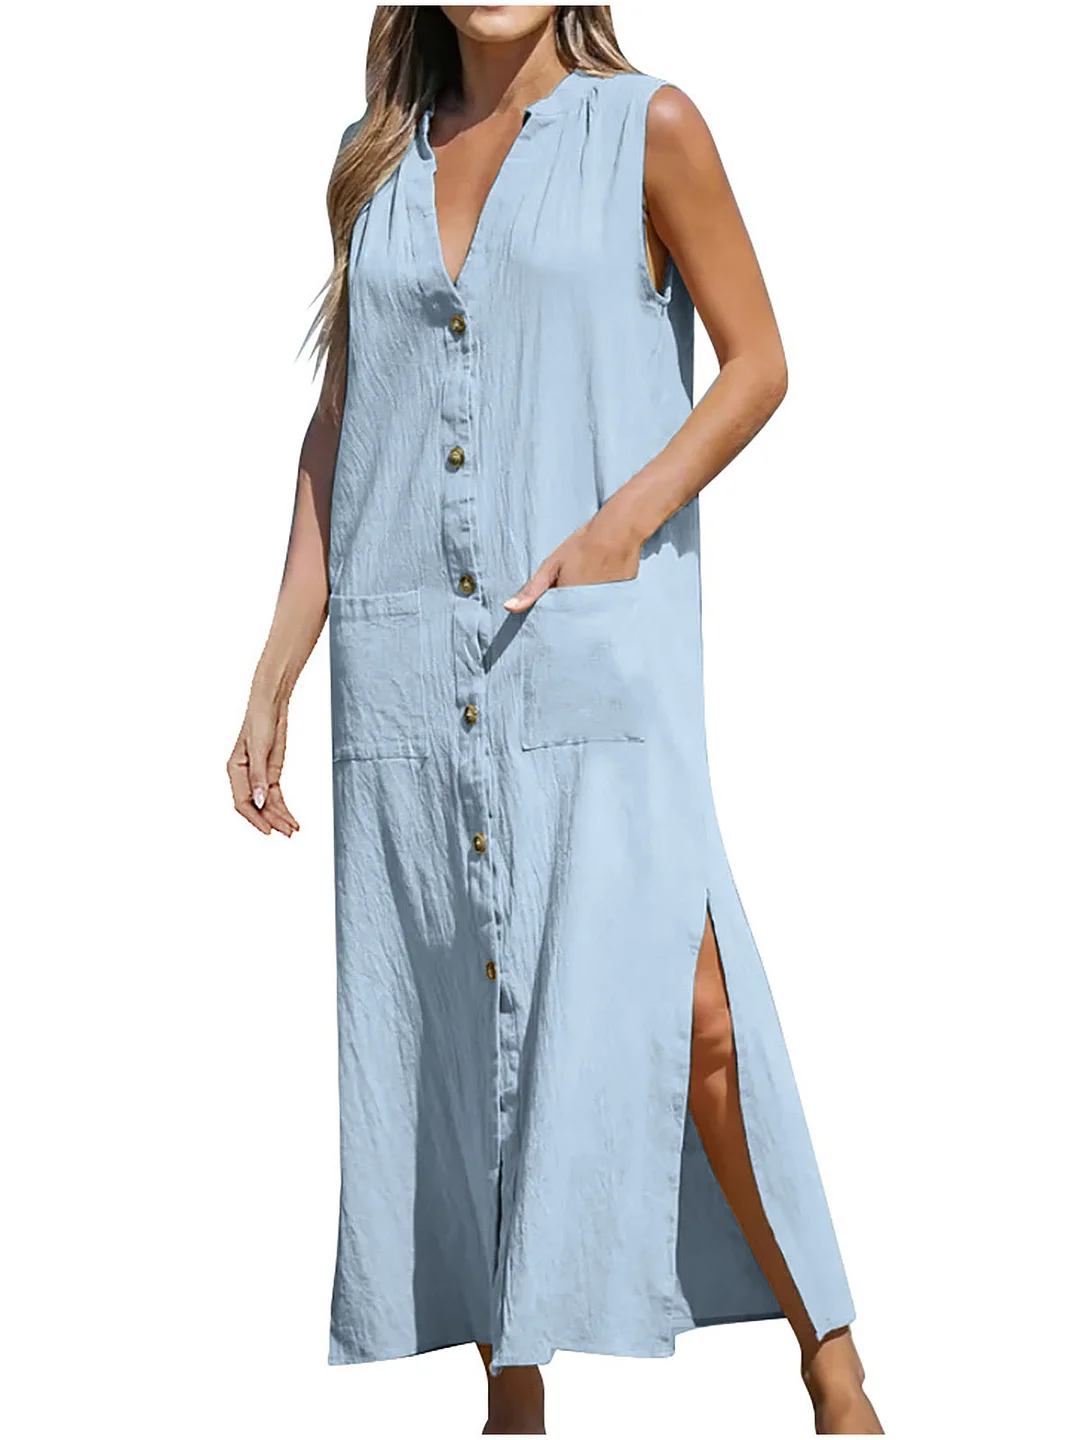 Women's Sleeveless V-neck Solid Color Buttons Pockets Maxi Dress